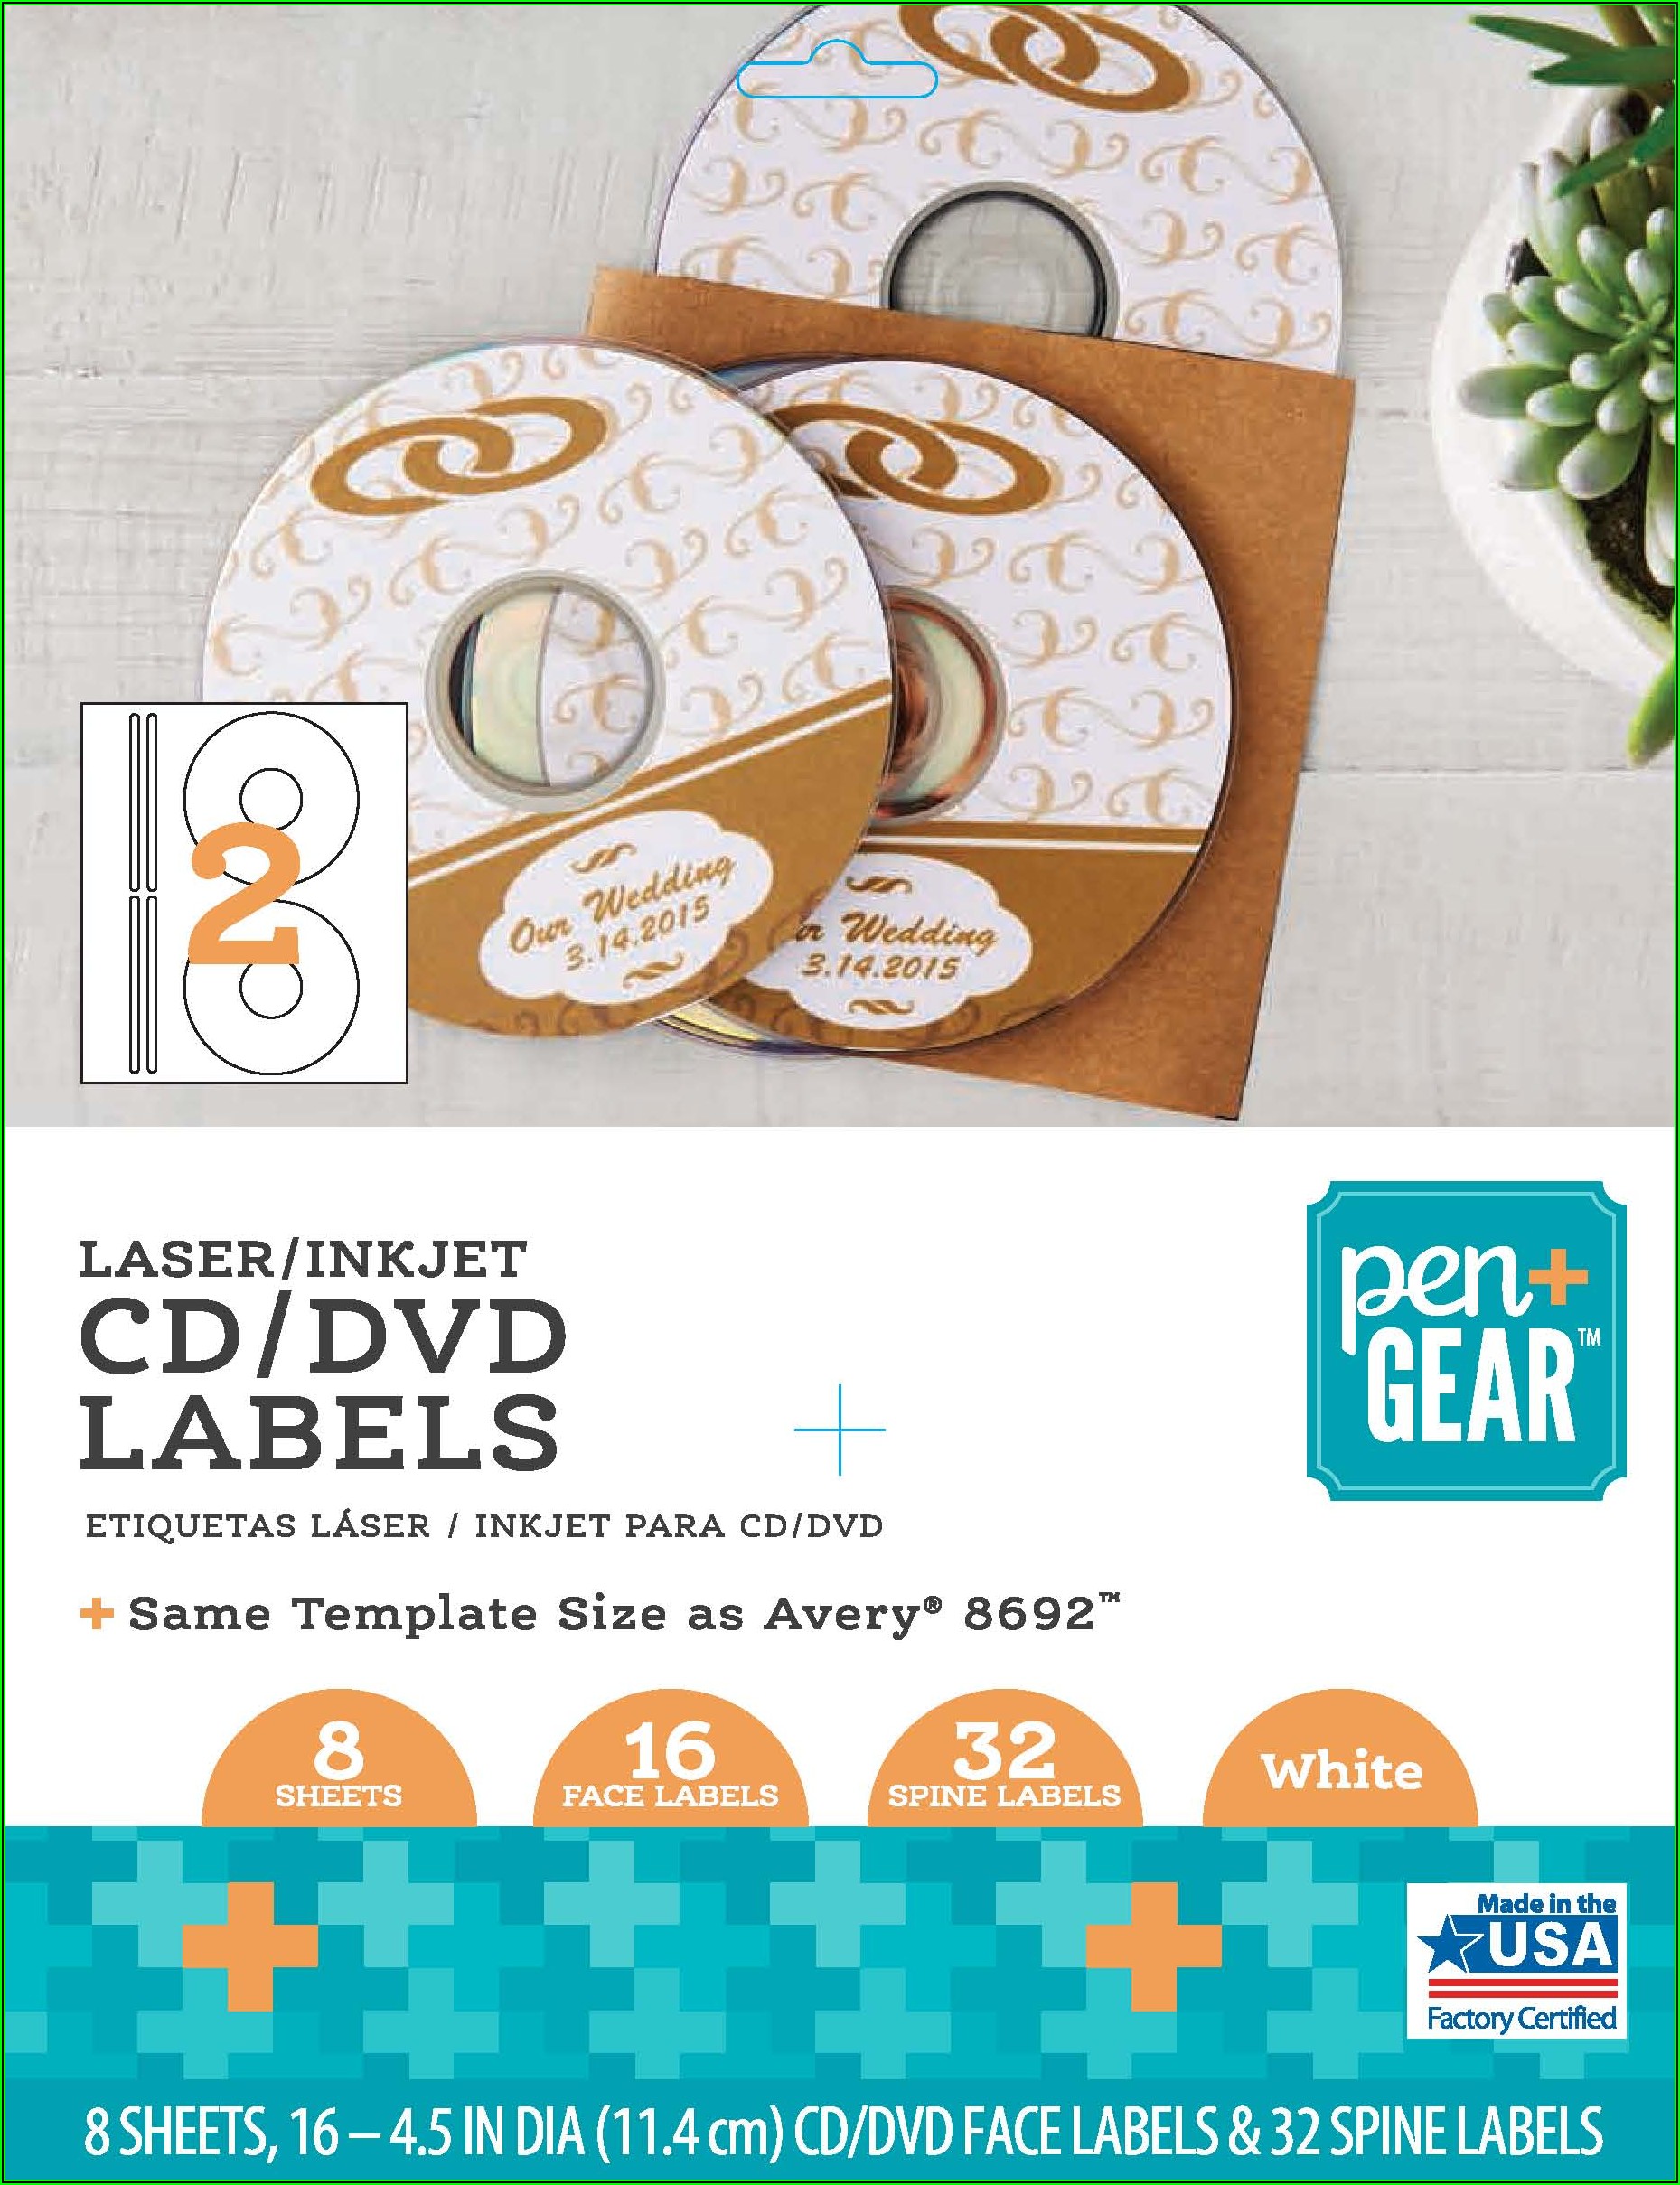 Avery Cd Label Template 8692